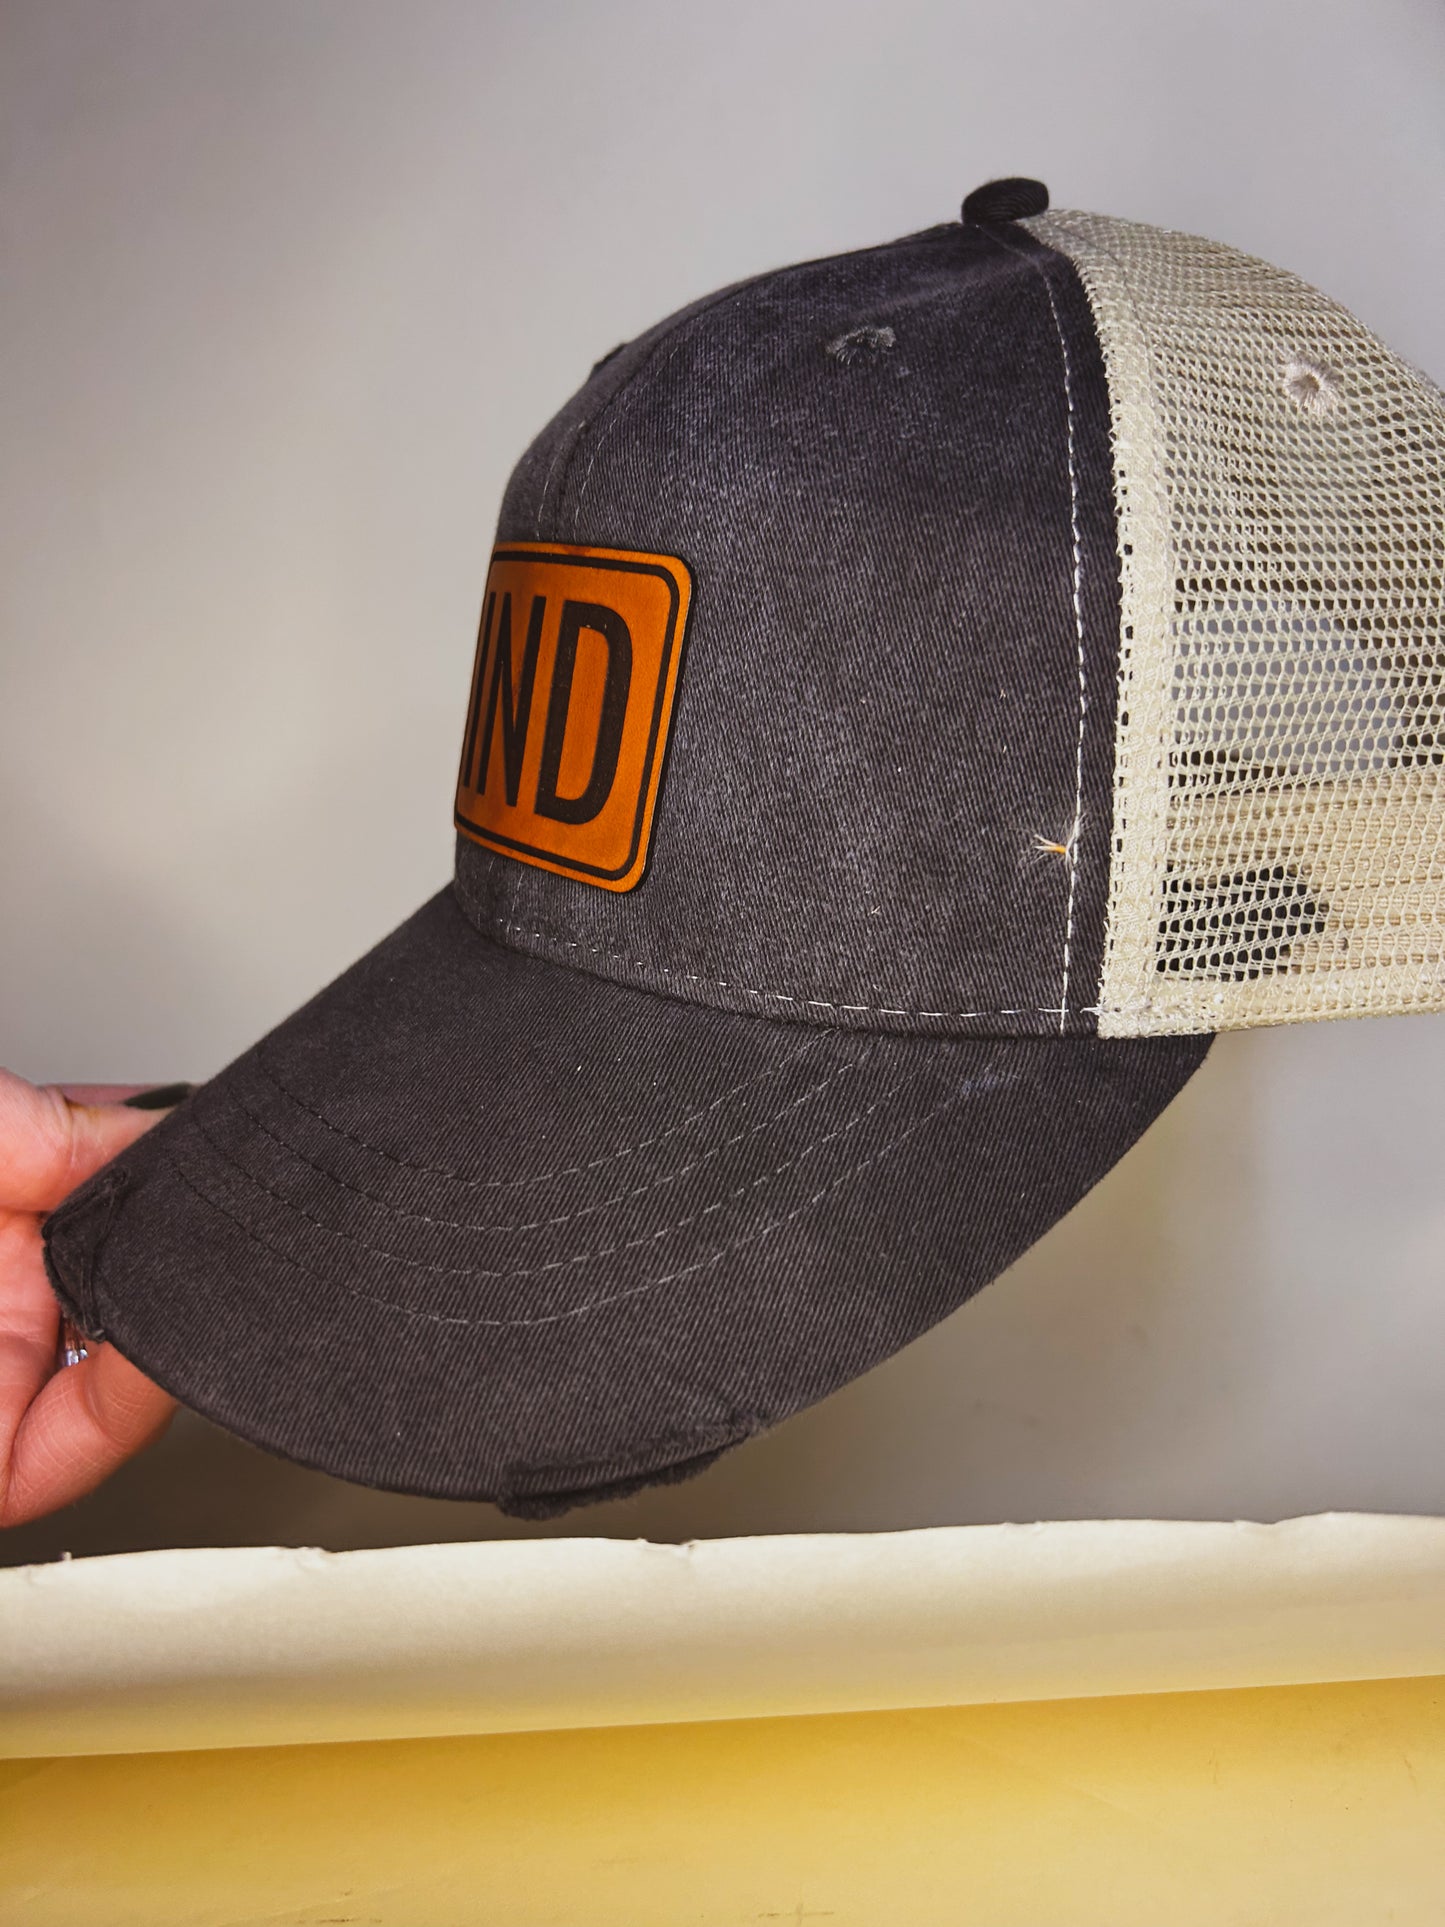 IND Patch on Distressed Charcoal Baseball Hat